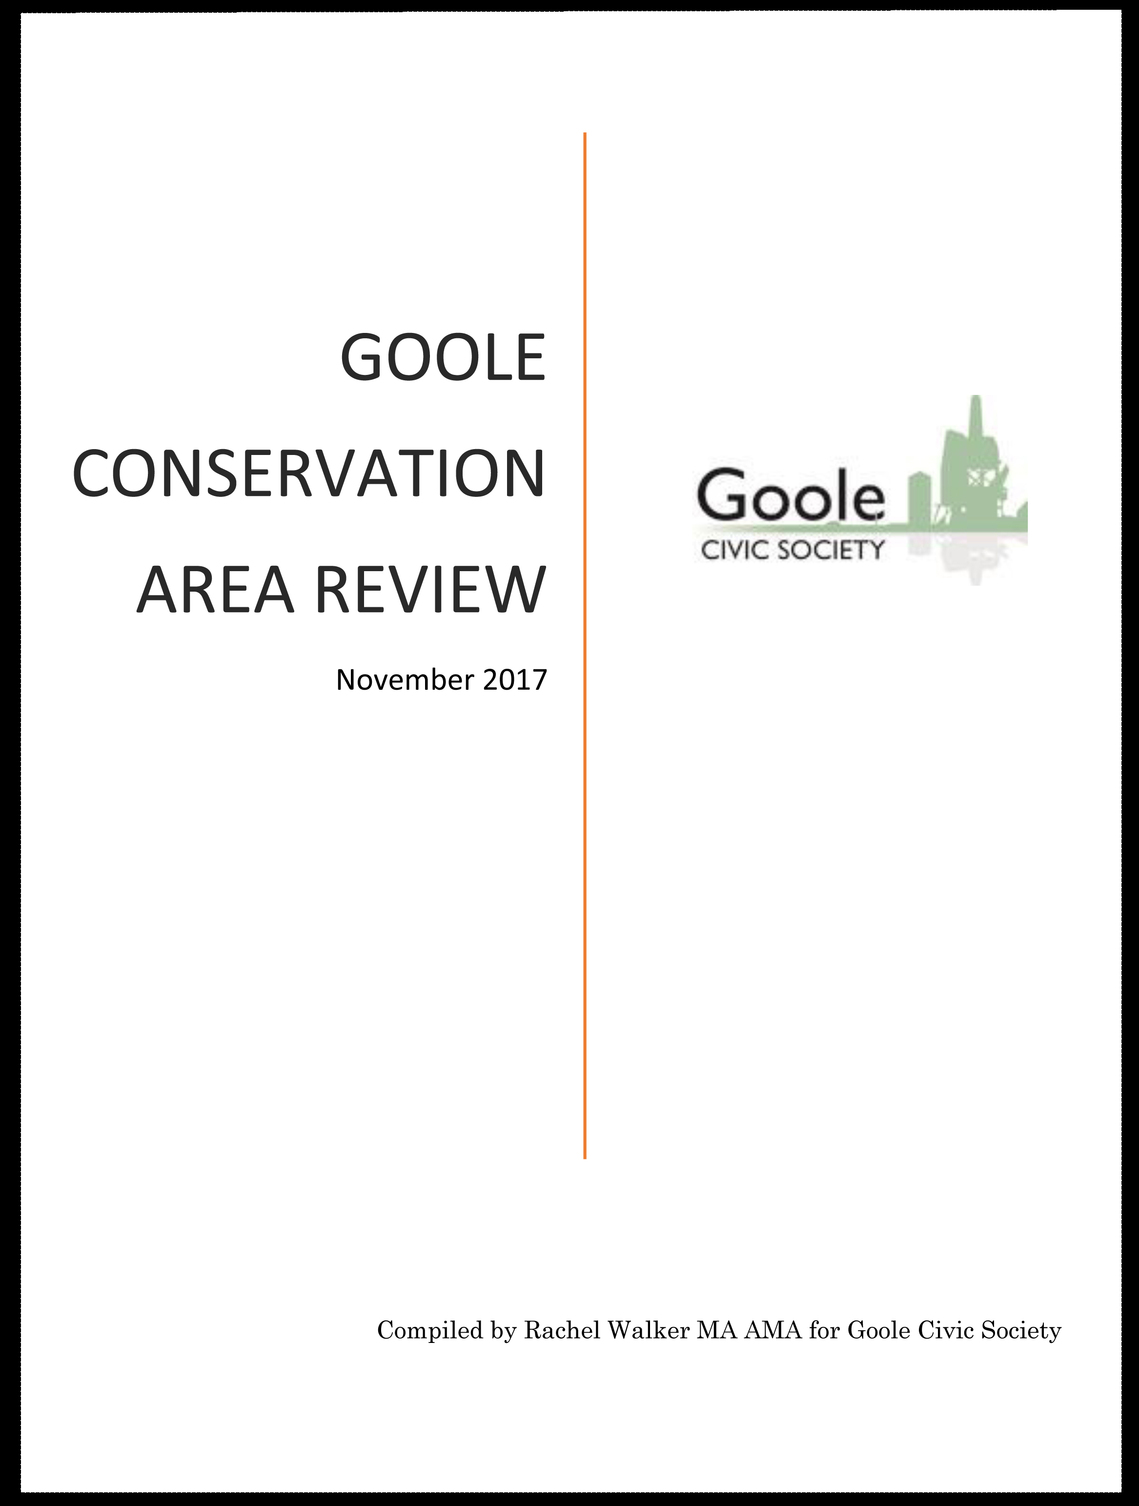 Goole Conservation Area Review front page